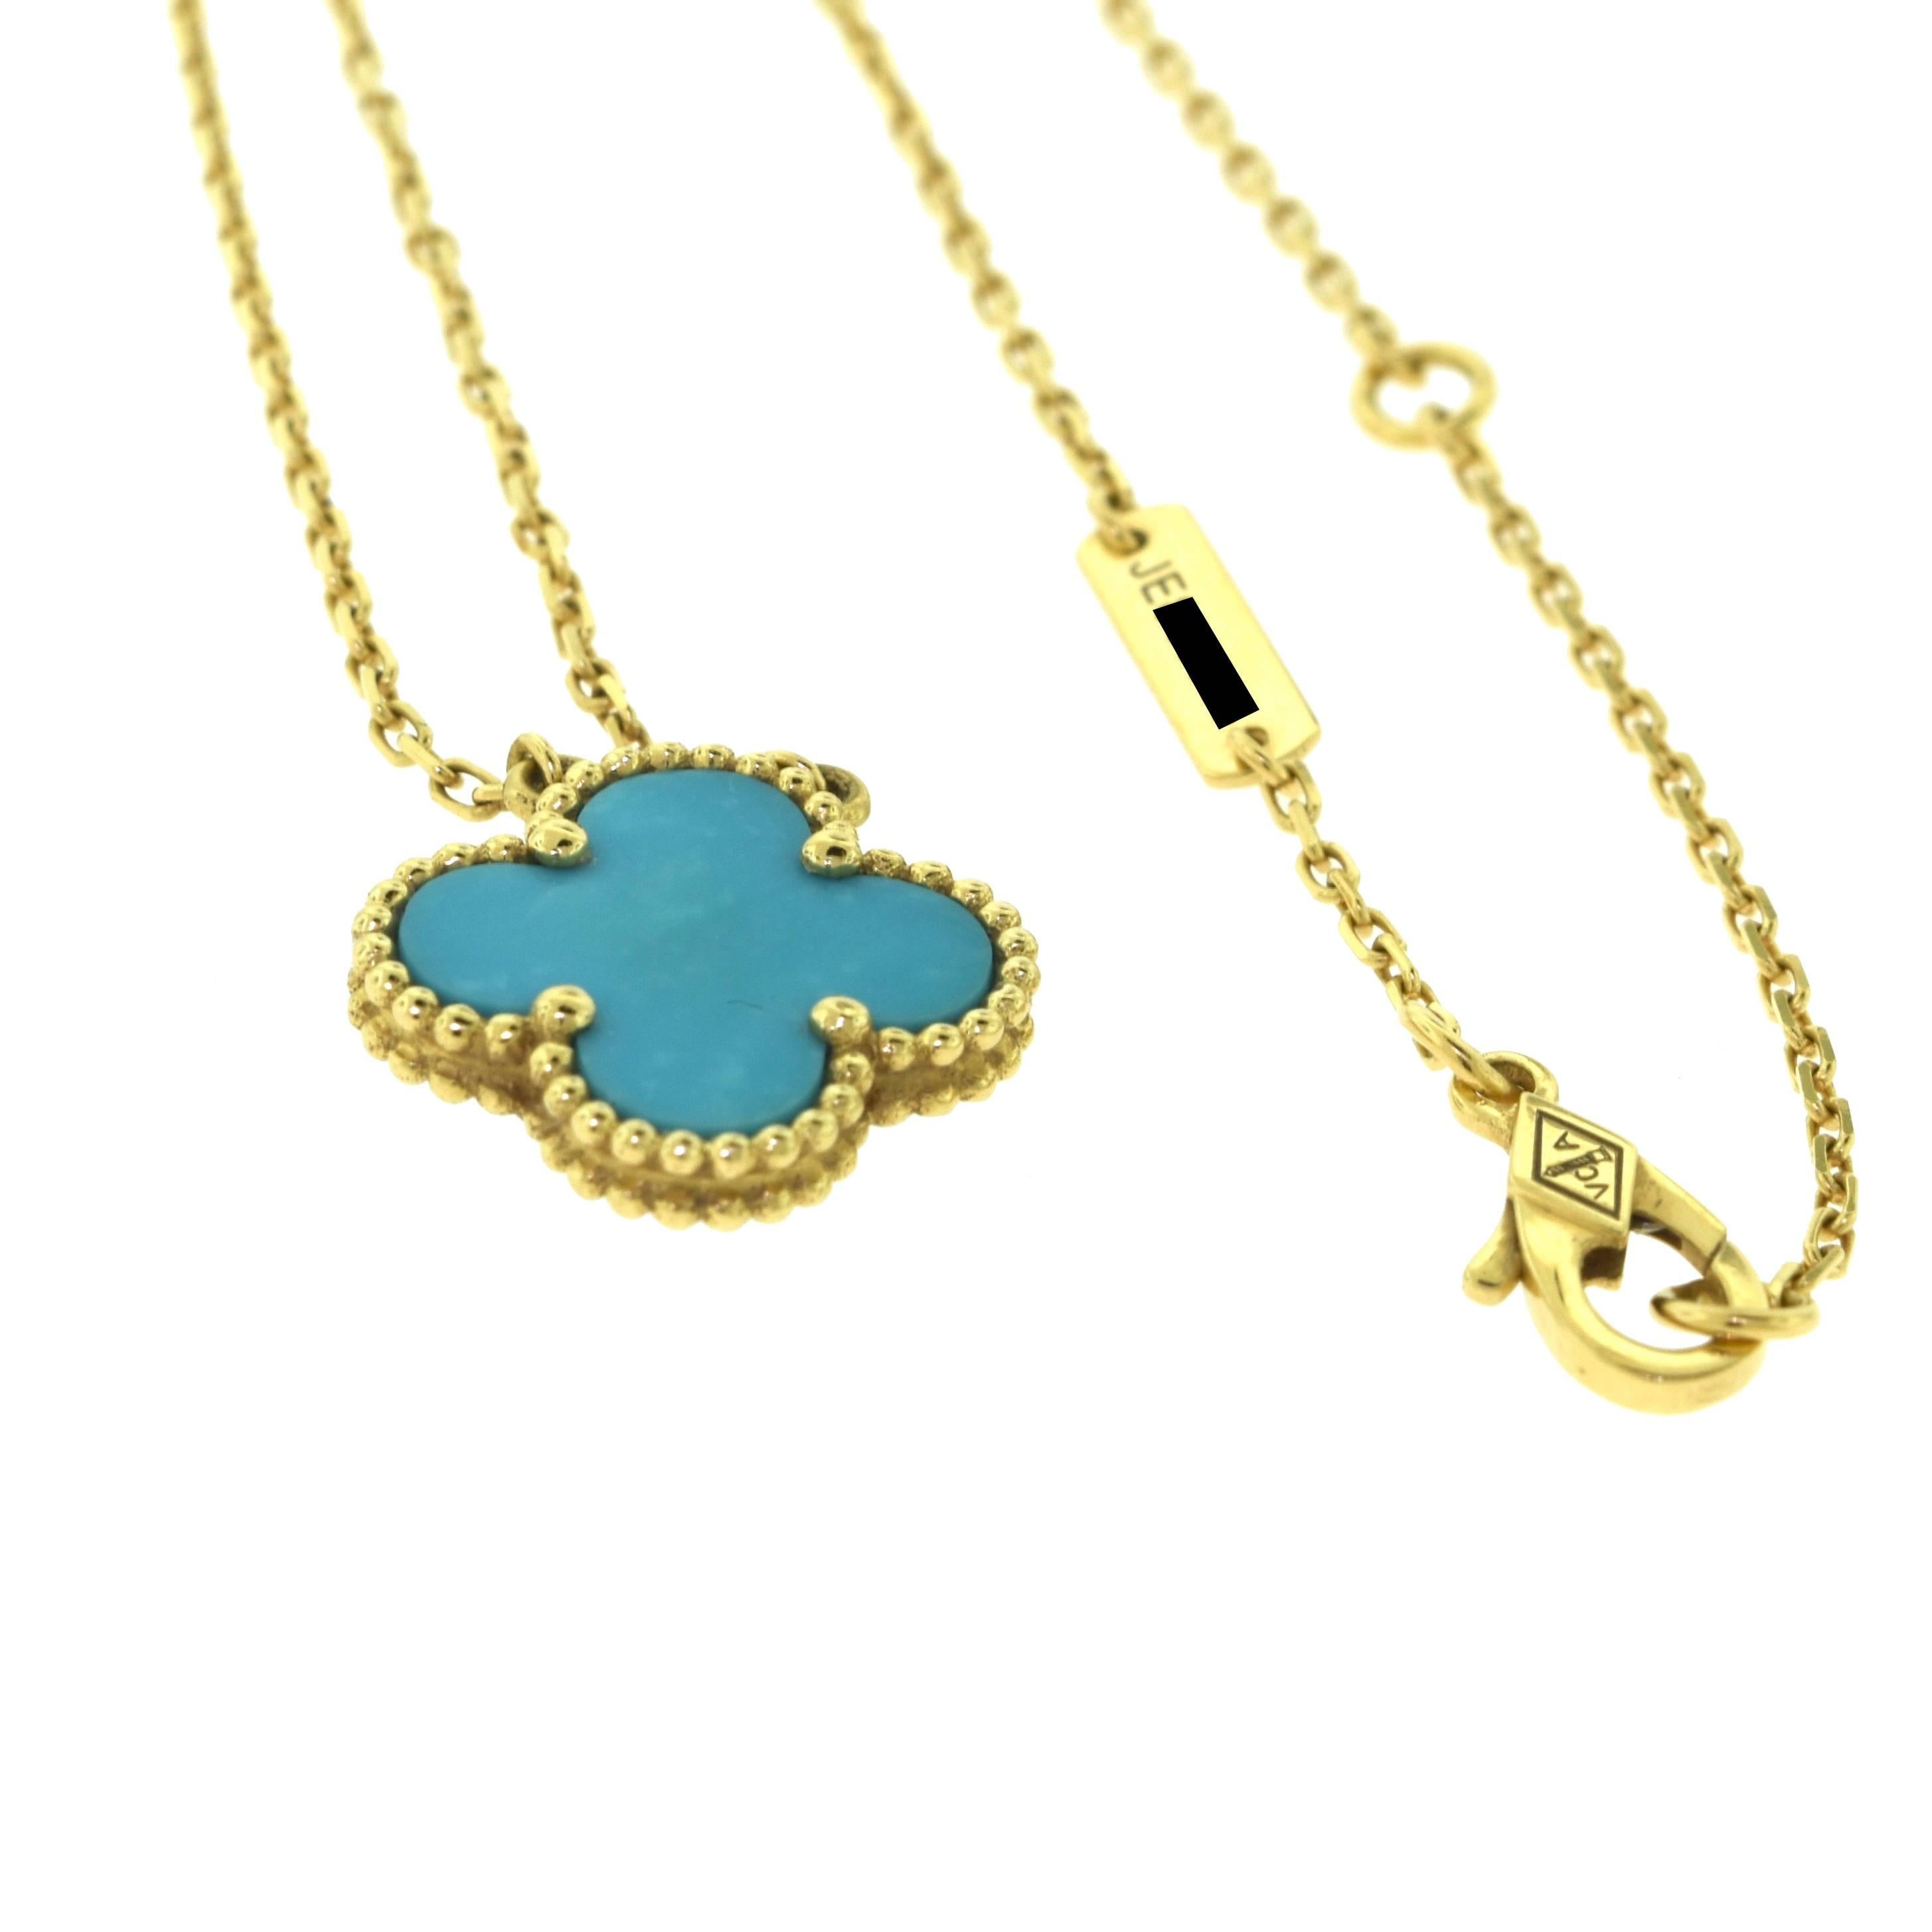 vca turquoise necklace